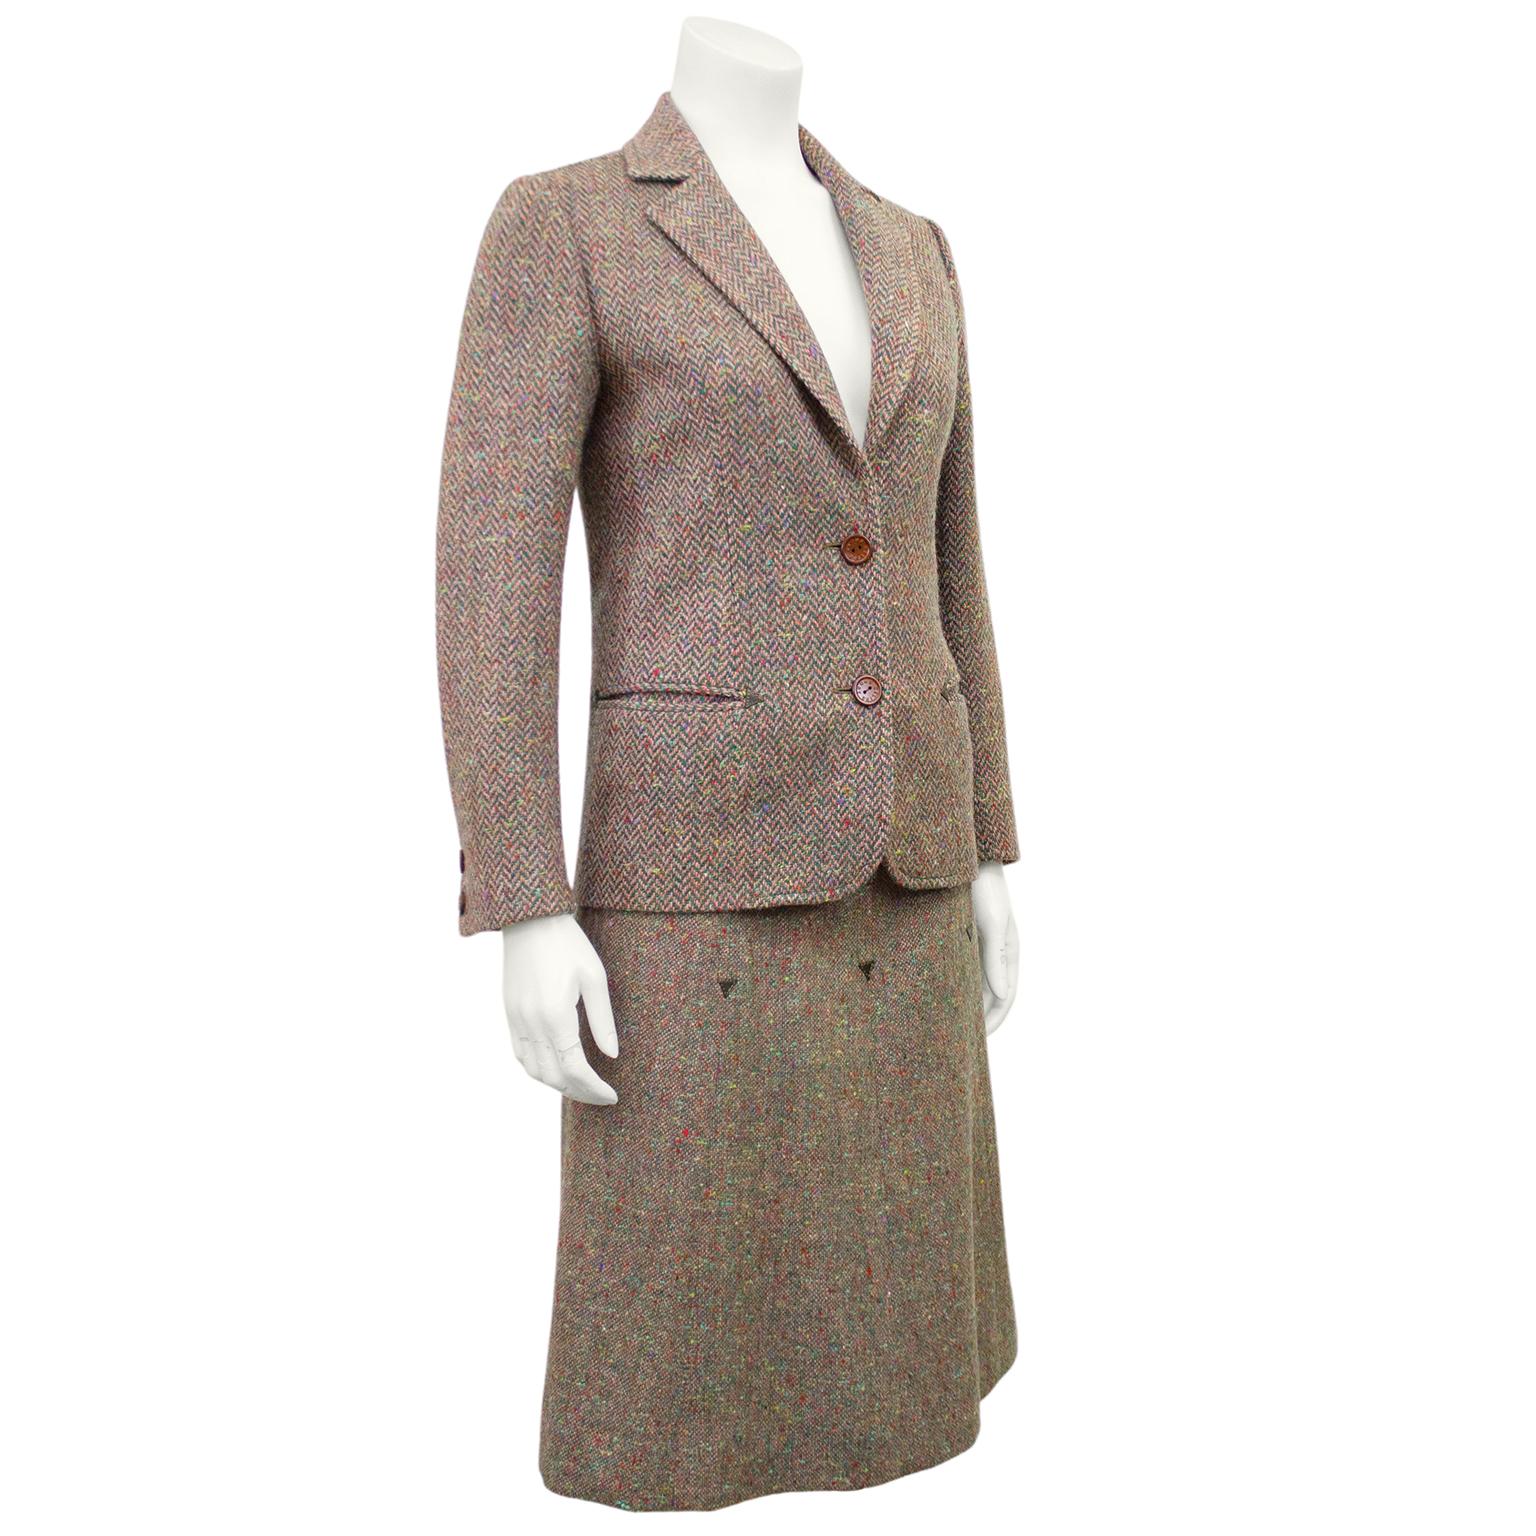 1970s Celine brown and multi colour herringbone wool skirt suit. Classic herringbone wool blazer with notched collar, horizontal slit pockets and branded brown buttons. Skirt is matching wool in Donegal pattern high waisted and A-line. Brown leather